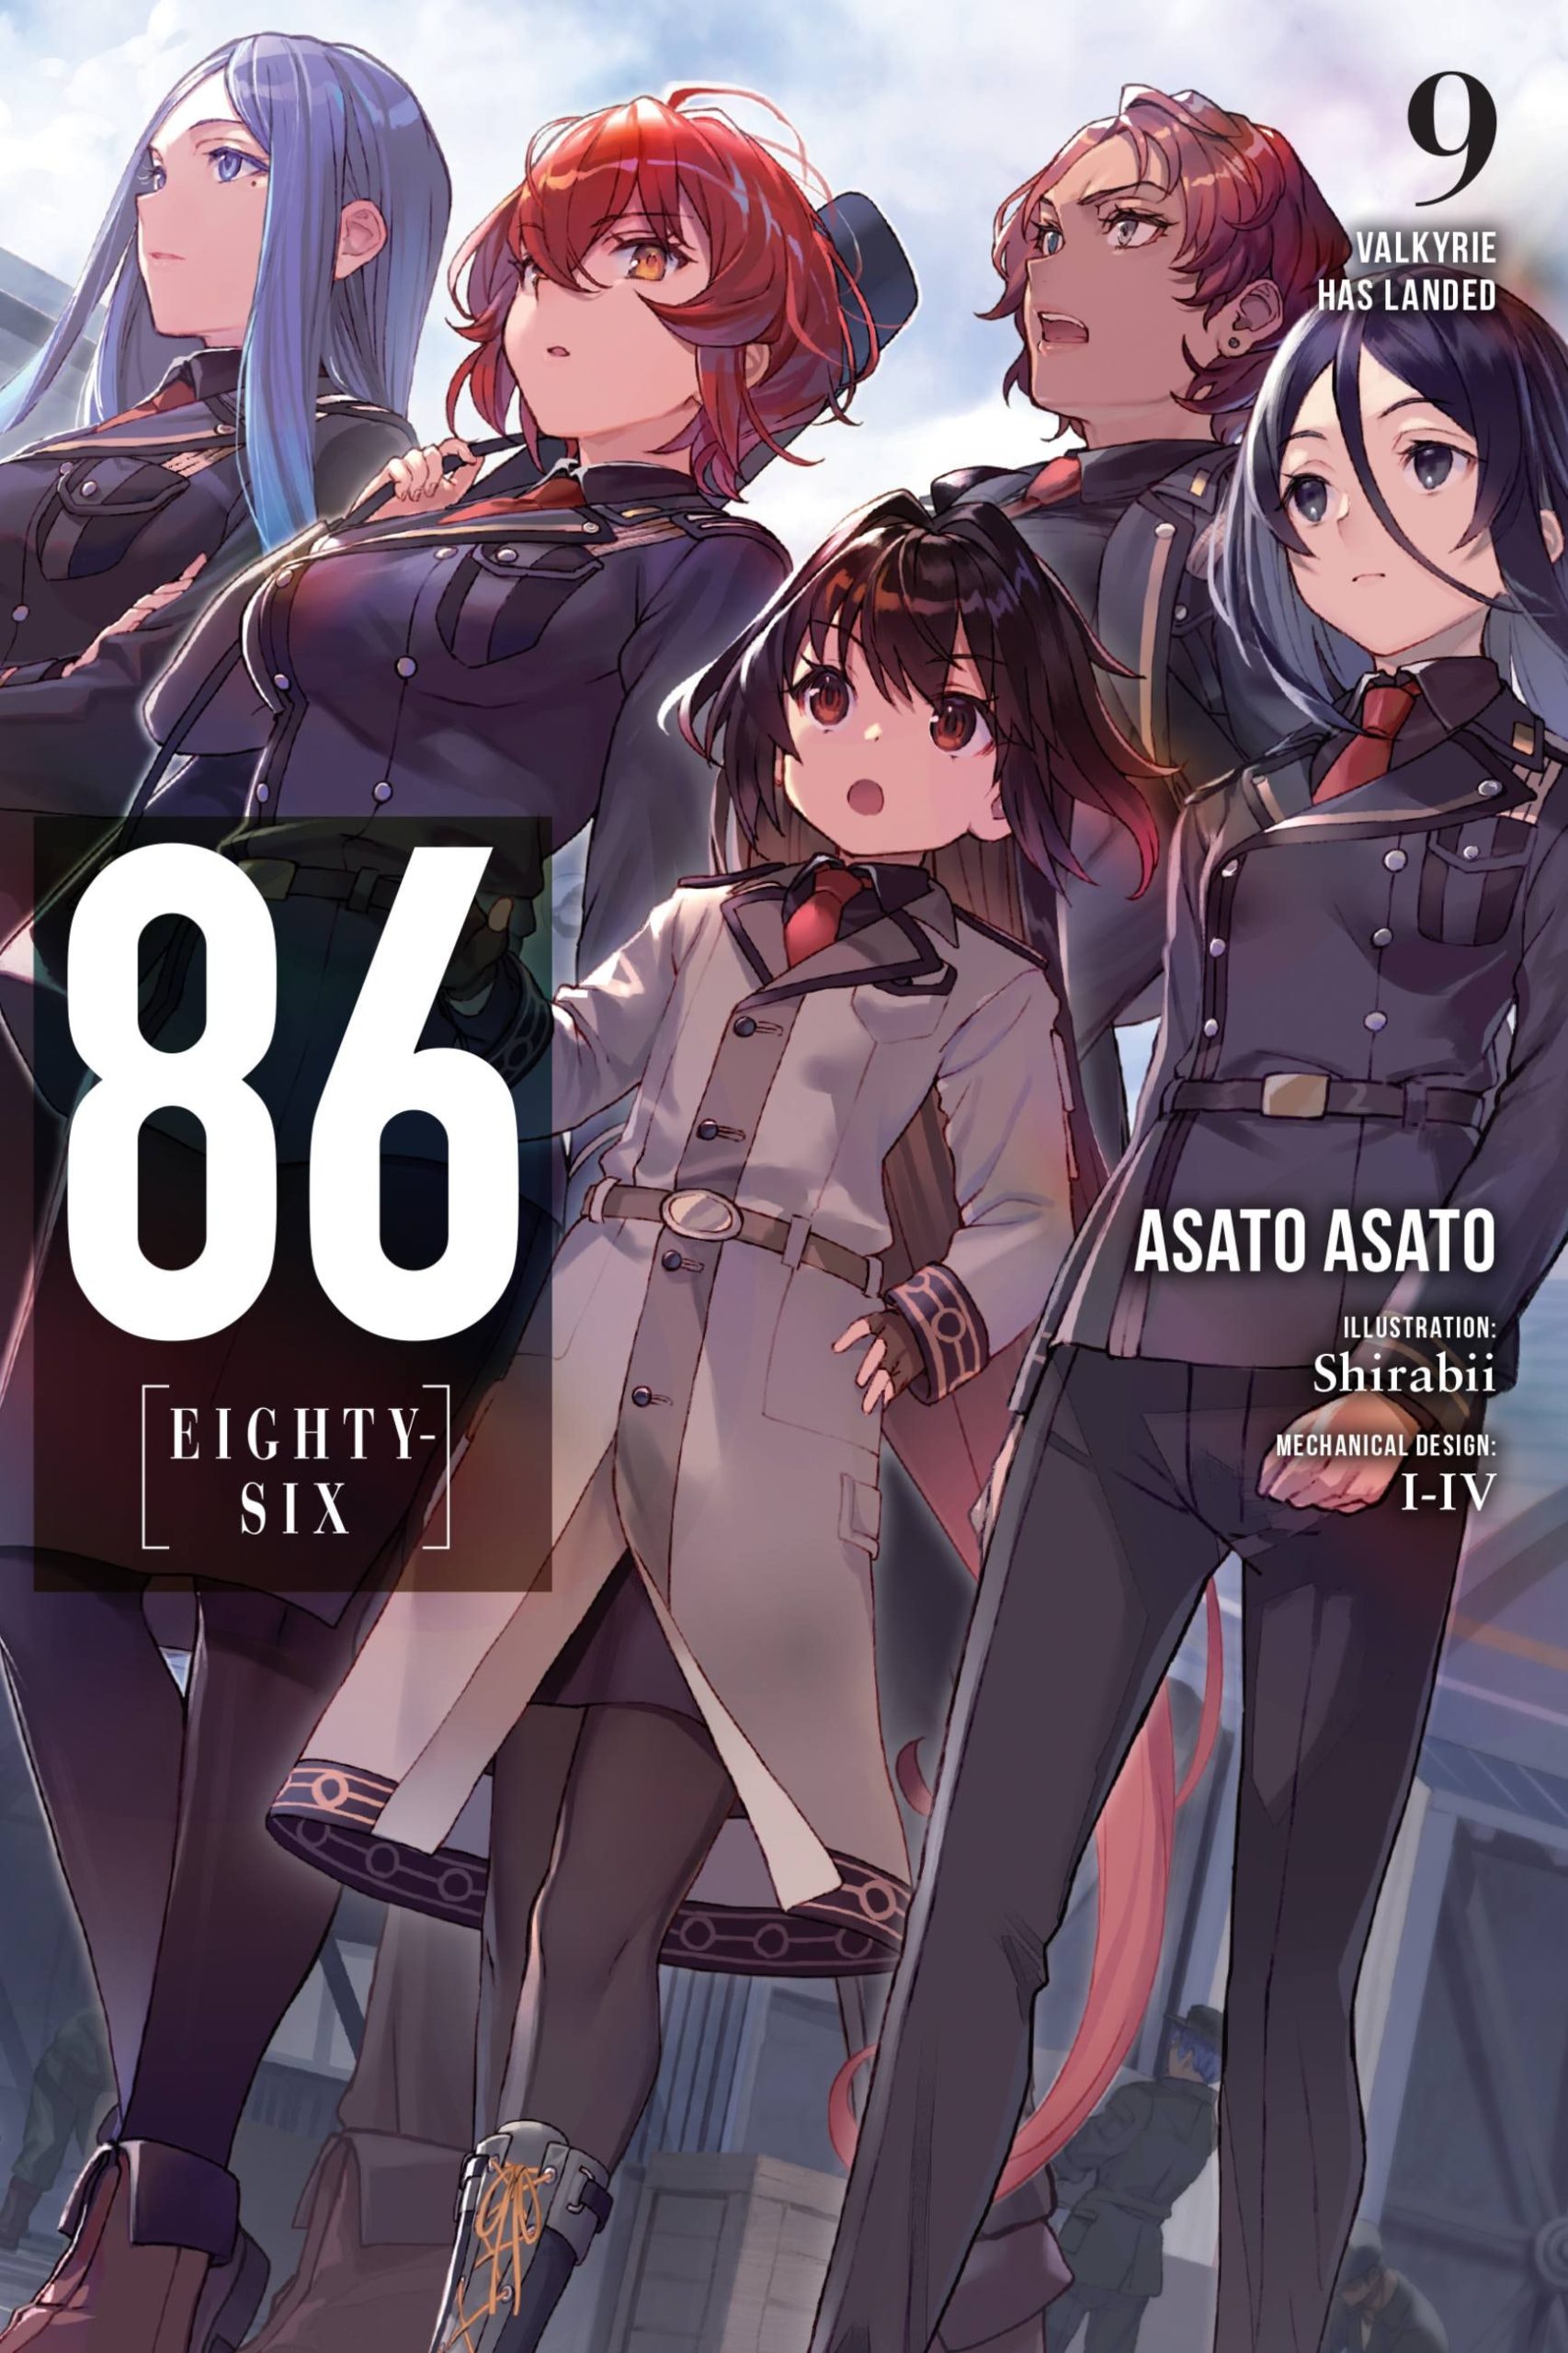 86 EIGHTY-SIX Anime Continues This October